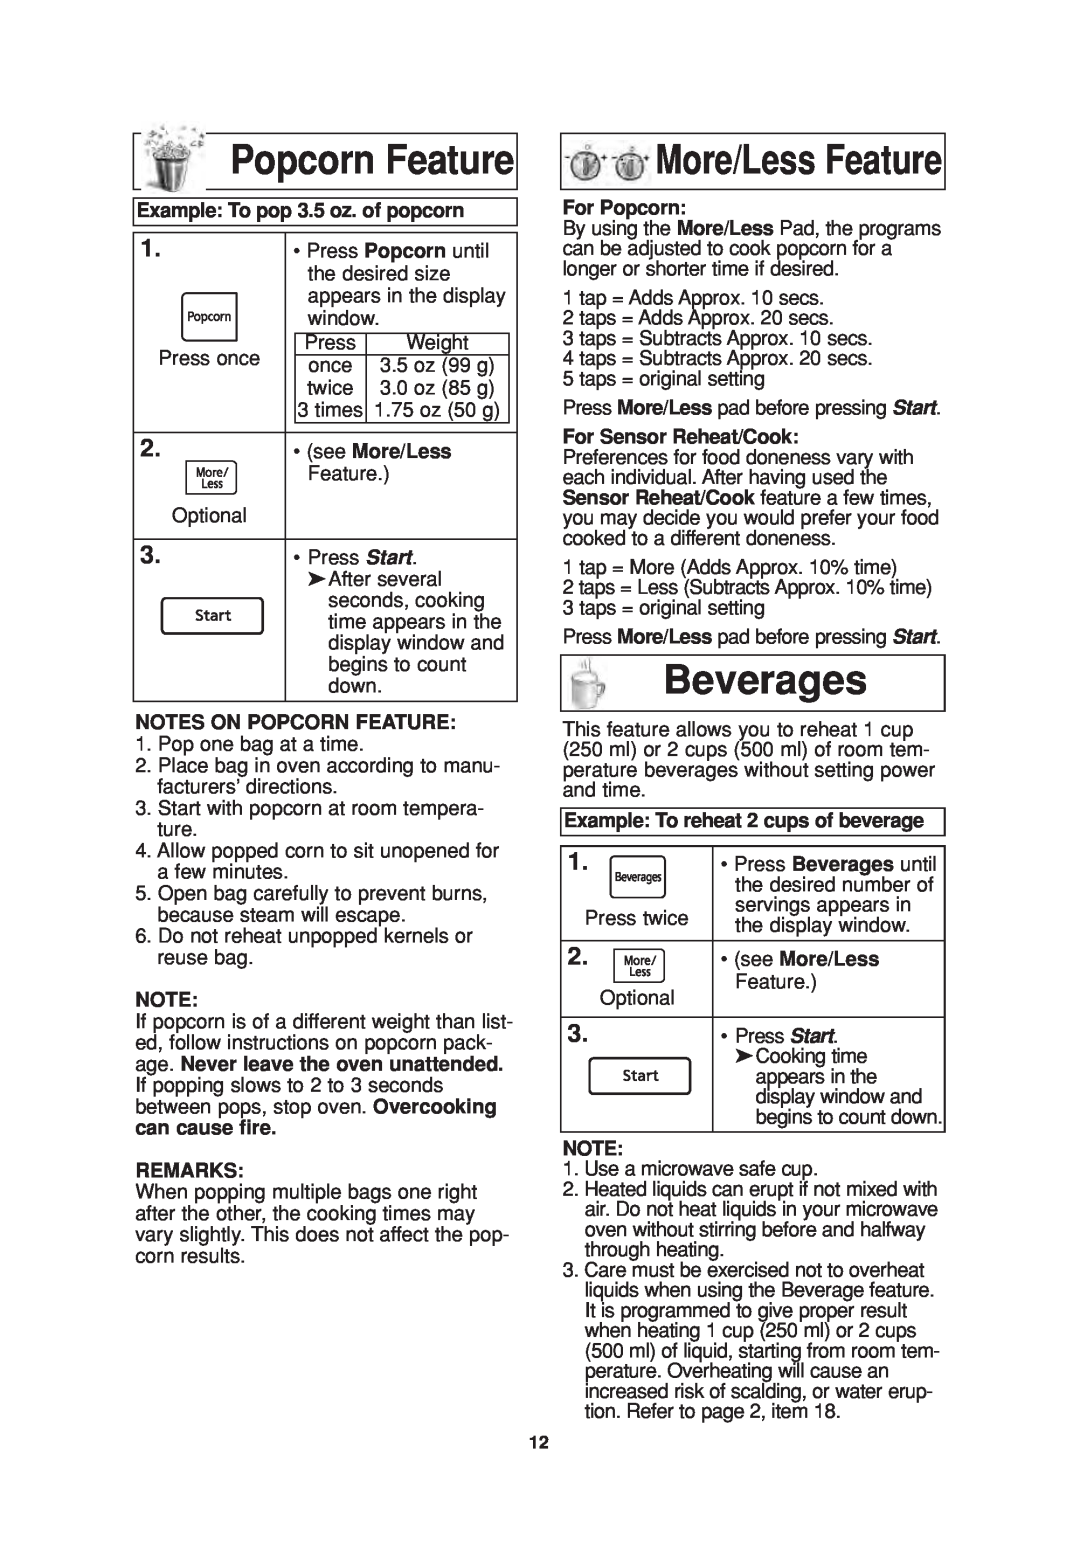 Panasonic NN-T664SF operating instructions Popcorn Feature, Beverages, More/Less Feature 